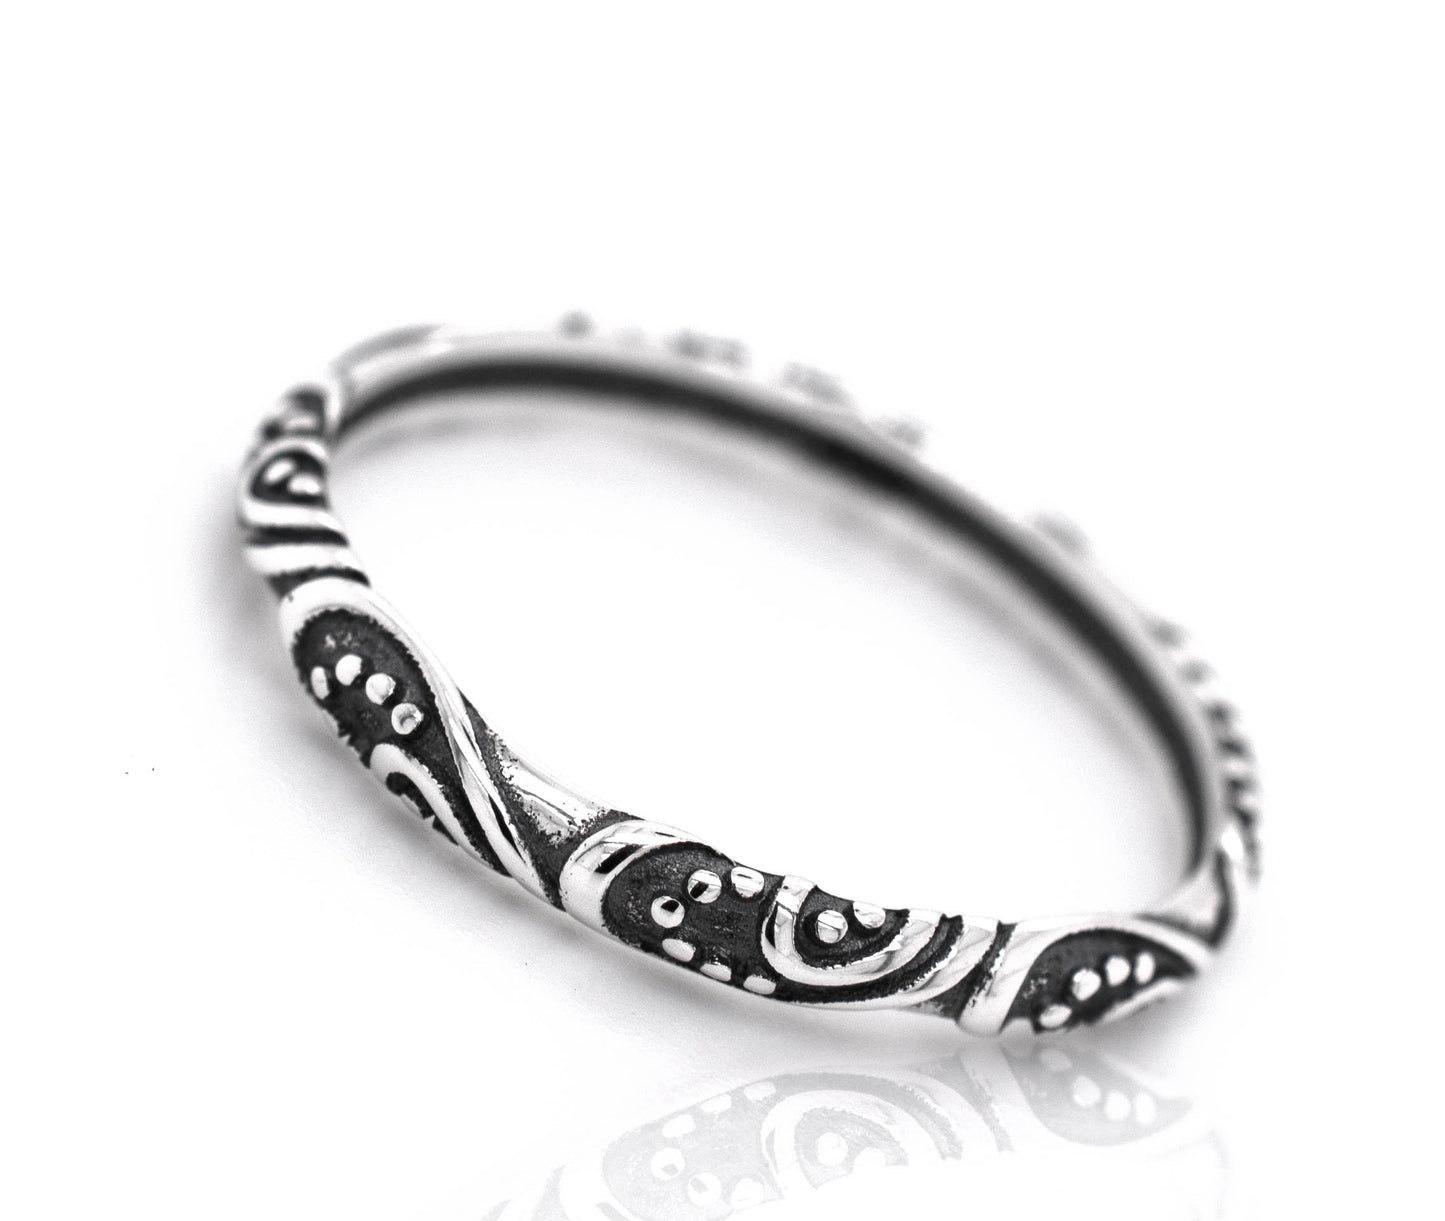 A Delicate Bali Style Band from Super Silver, made of .925 sterling silver, with ornate black and white vintage designs.